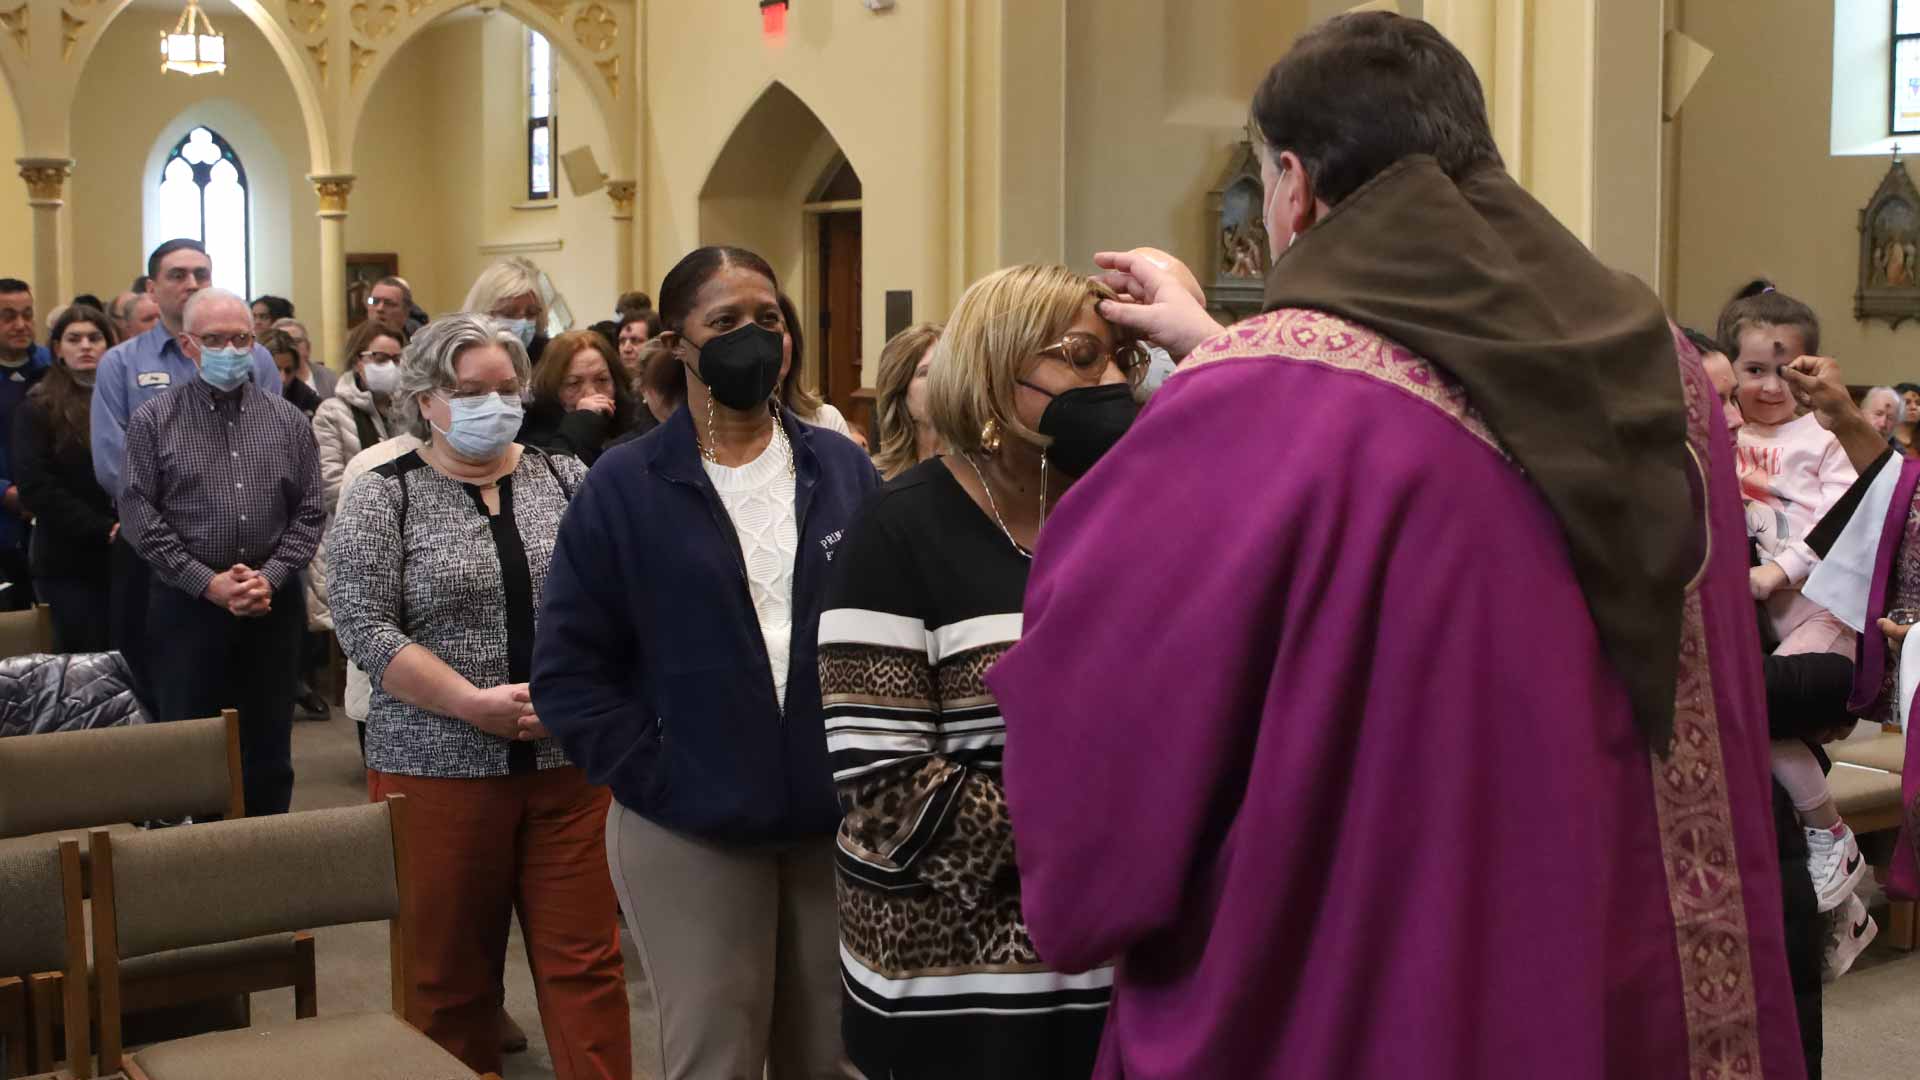 Capuchin Father Steve Kropp places ashes on the forehead of a Massgoer on Ash Wednesday, March 2, 2022 in the sanctuary of St. Bonaventure Chapel in Detroit, Michigan.